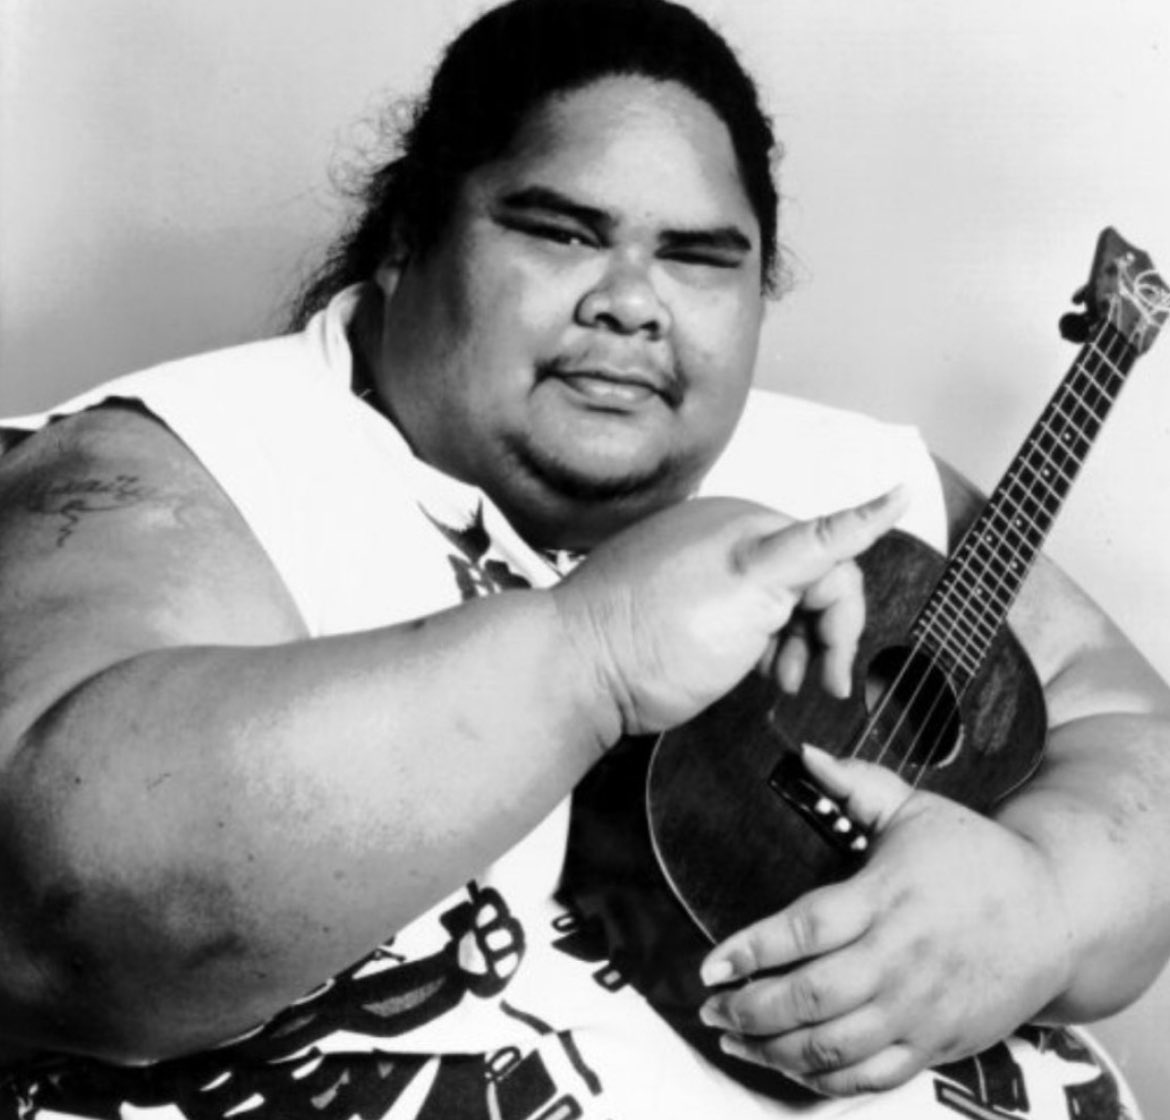 Israel Kamakawiwo'ole, often affectionately referred to as 'Iz,' left an indelible mark on the world, transcending his physical presence through his music, activism, and his deep connection to the Hawaiian culture. Born on May 20, 1959, in Honolulu, Hawaii, he was destined to